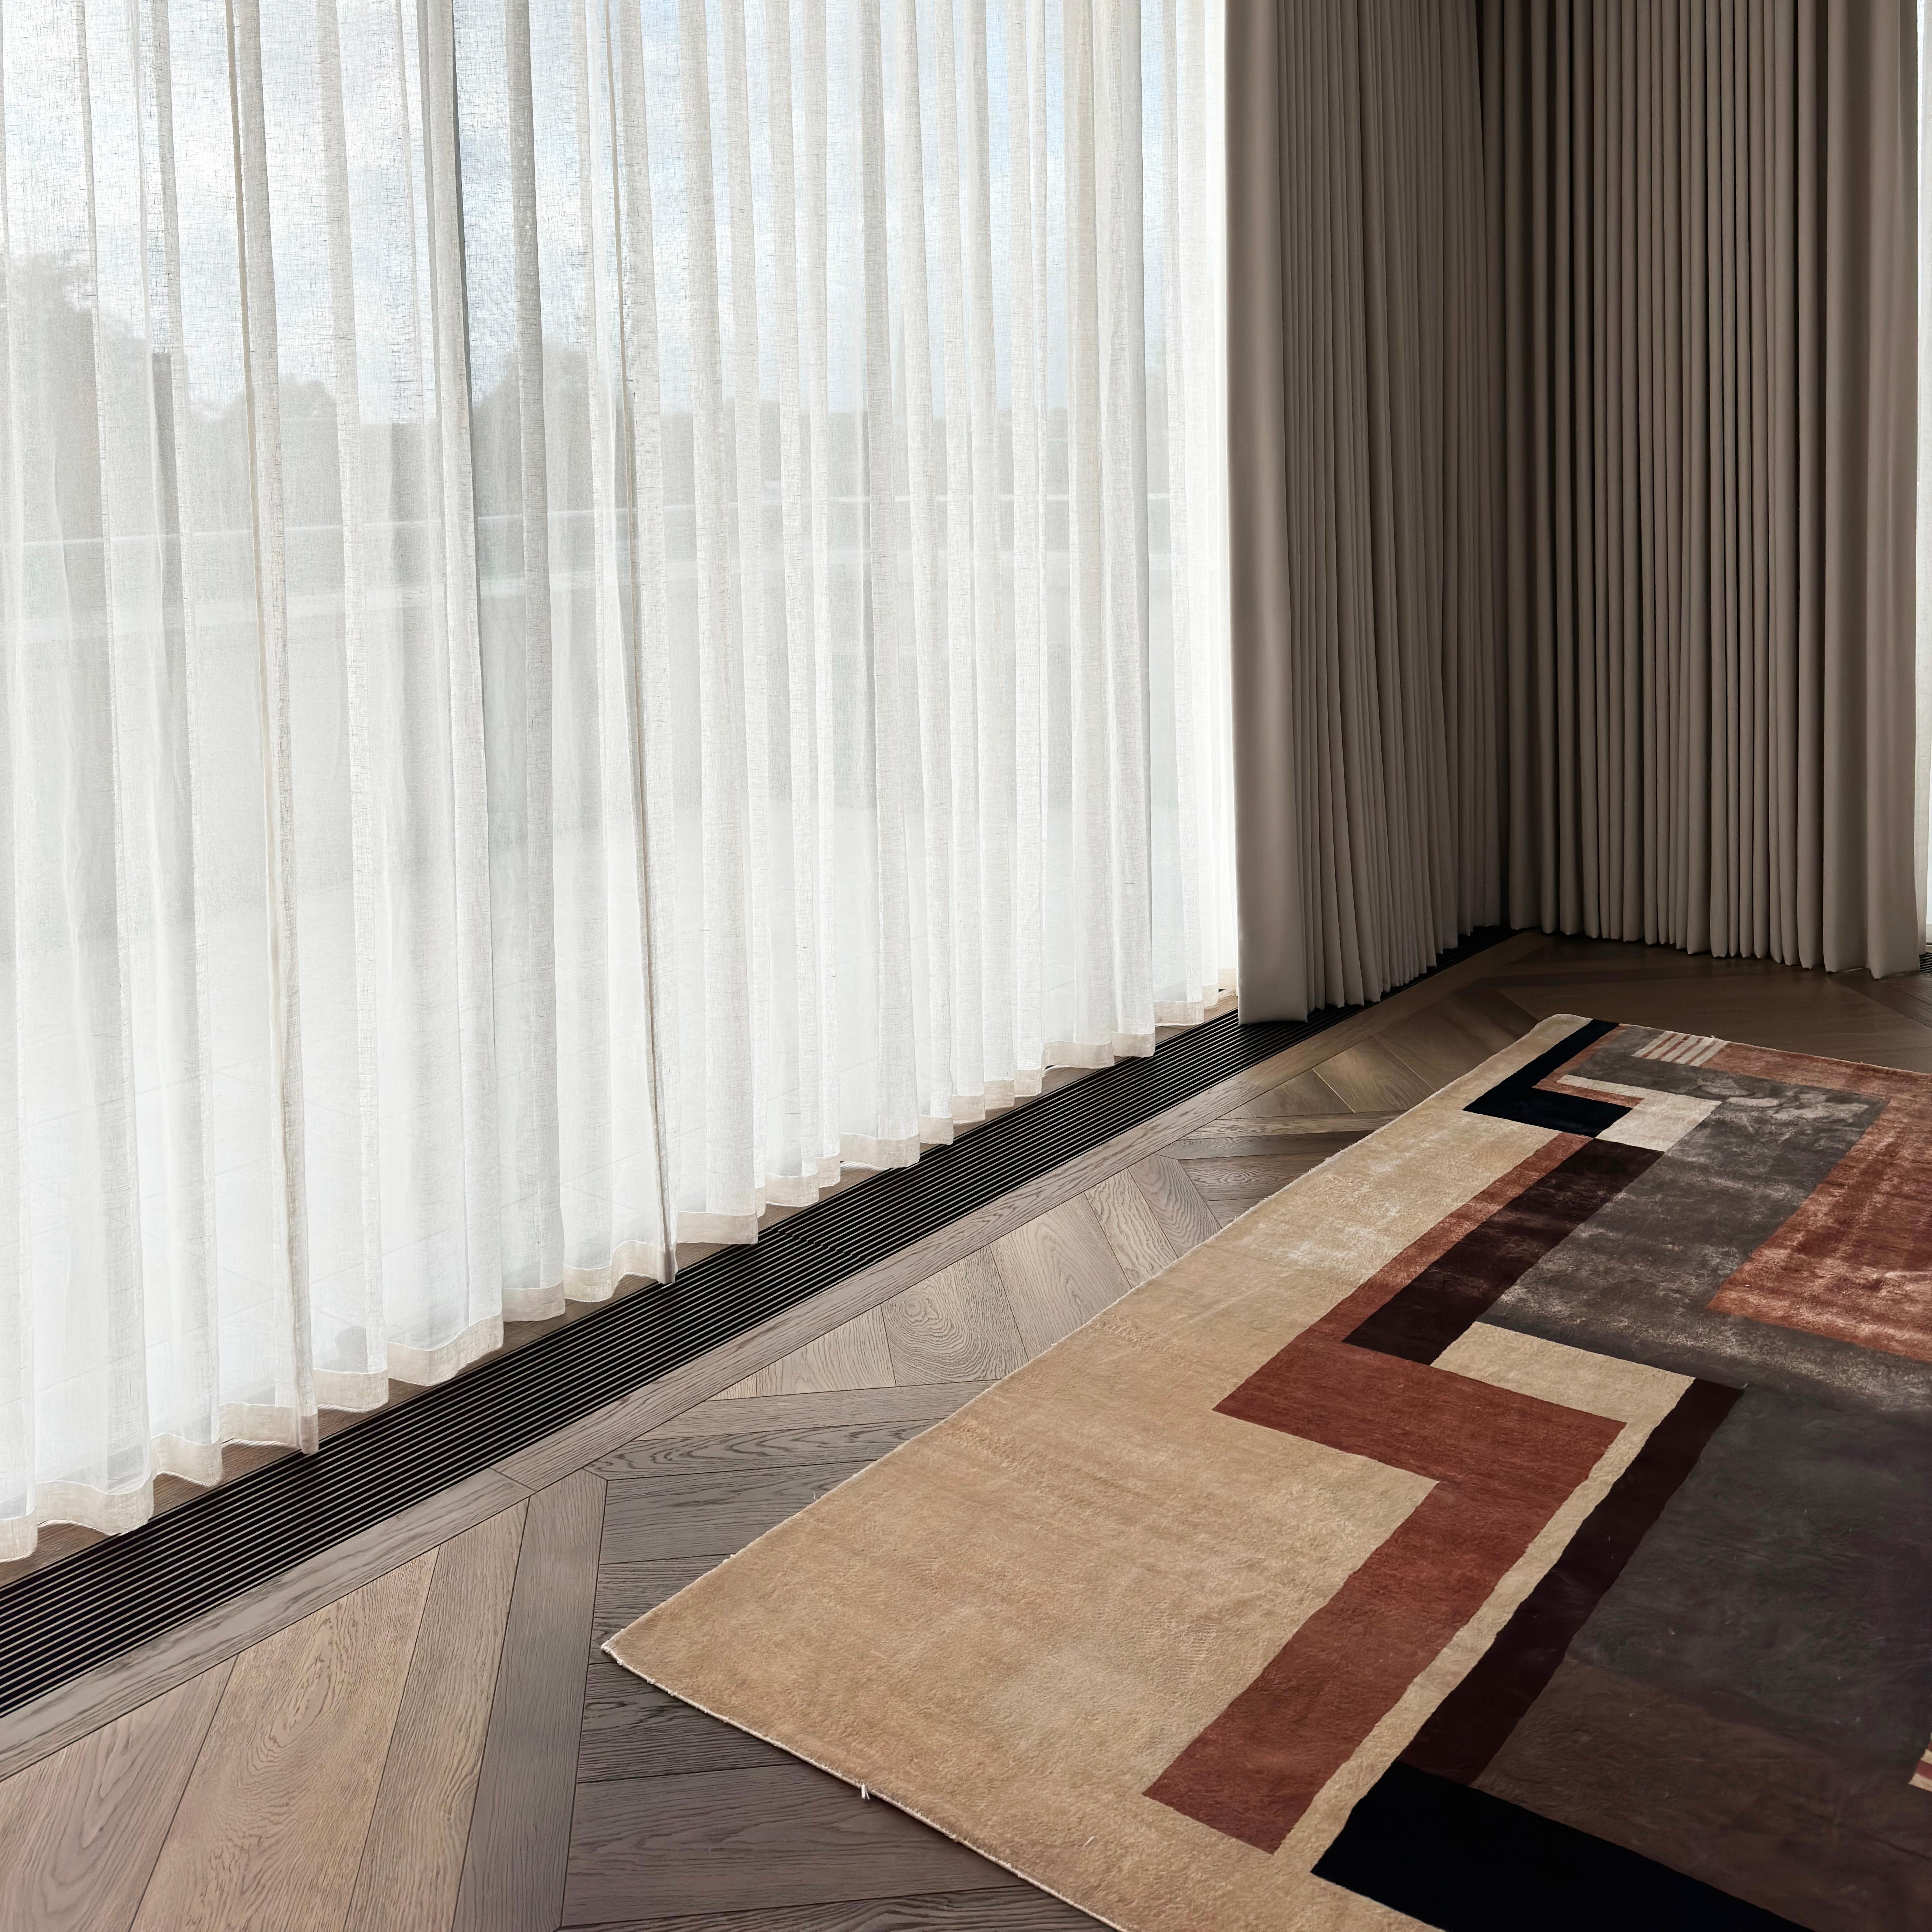 Silk Rug by Galerie Thierry Boccara—an avant-garde marvel drawing inspiration from Ivan Da Silva's 'constructivist' linear pattern, harmonizing Art Deco allure. 

The rug has been hand-knotted with finesse; its palette of muted coral red and natural